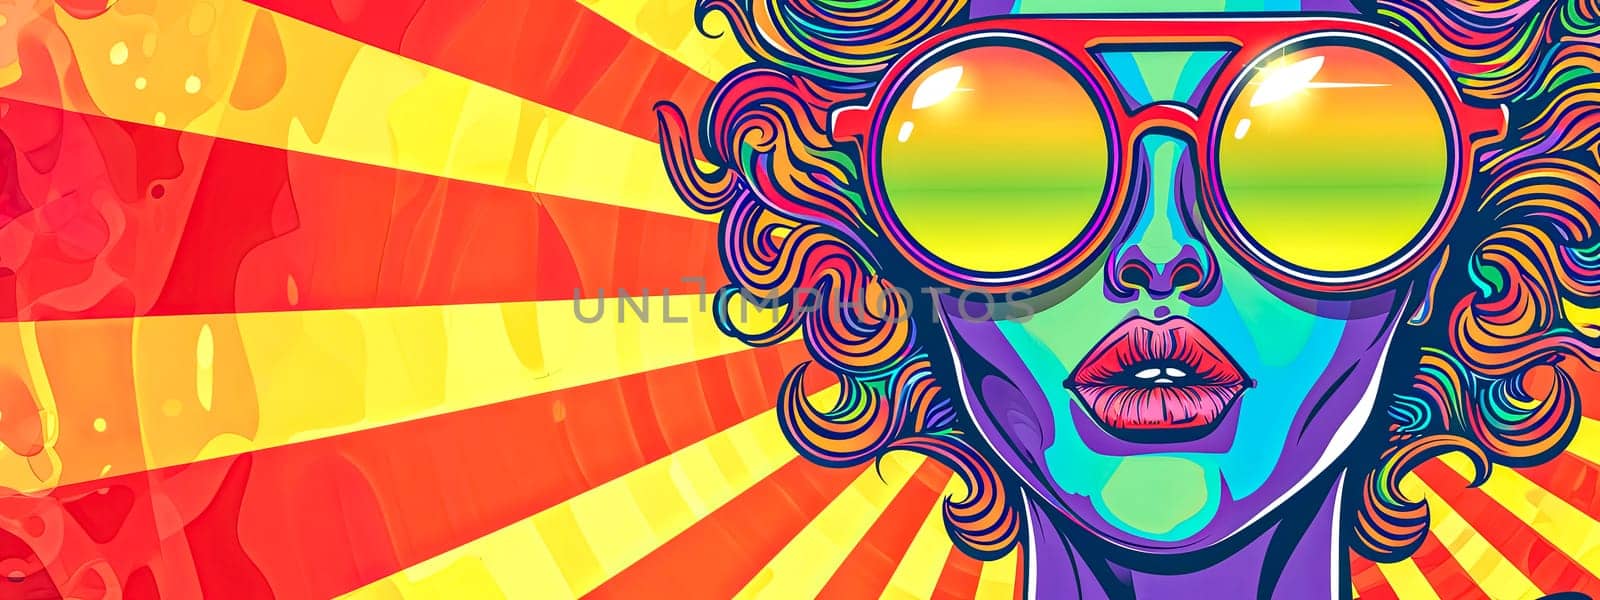 Psychedelic portrait of a woman with colorful patterns and sunset glasses by Edophoto